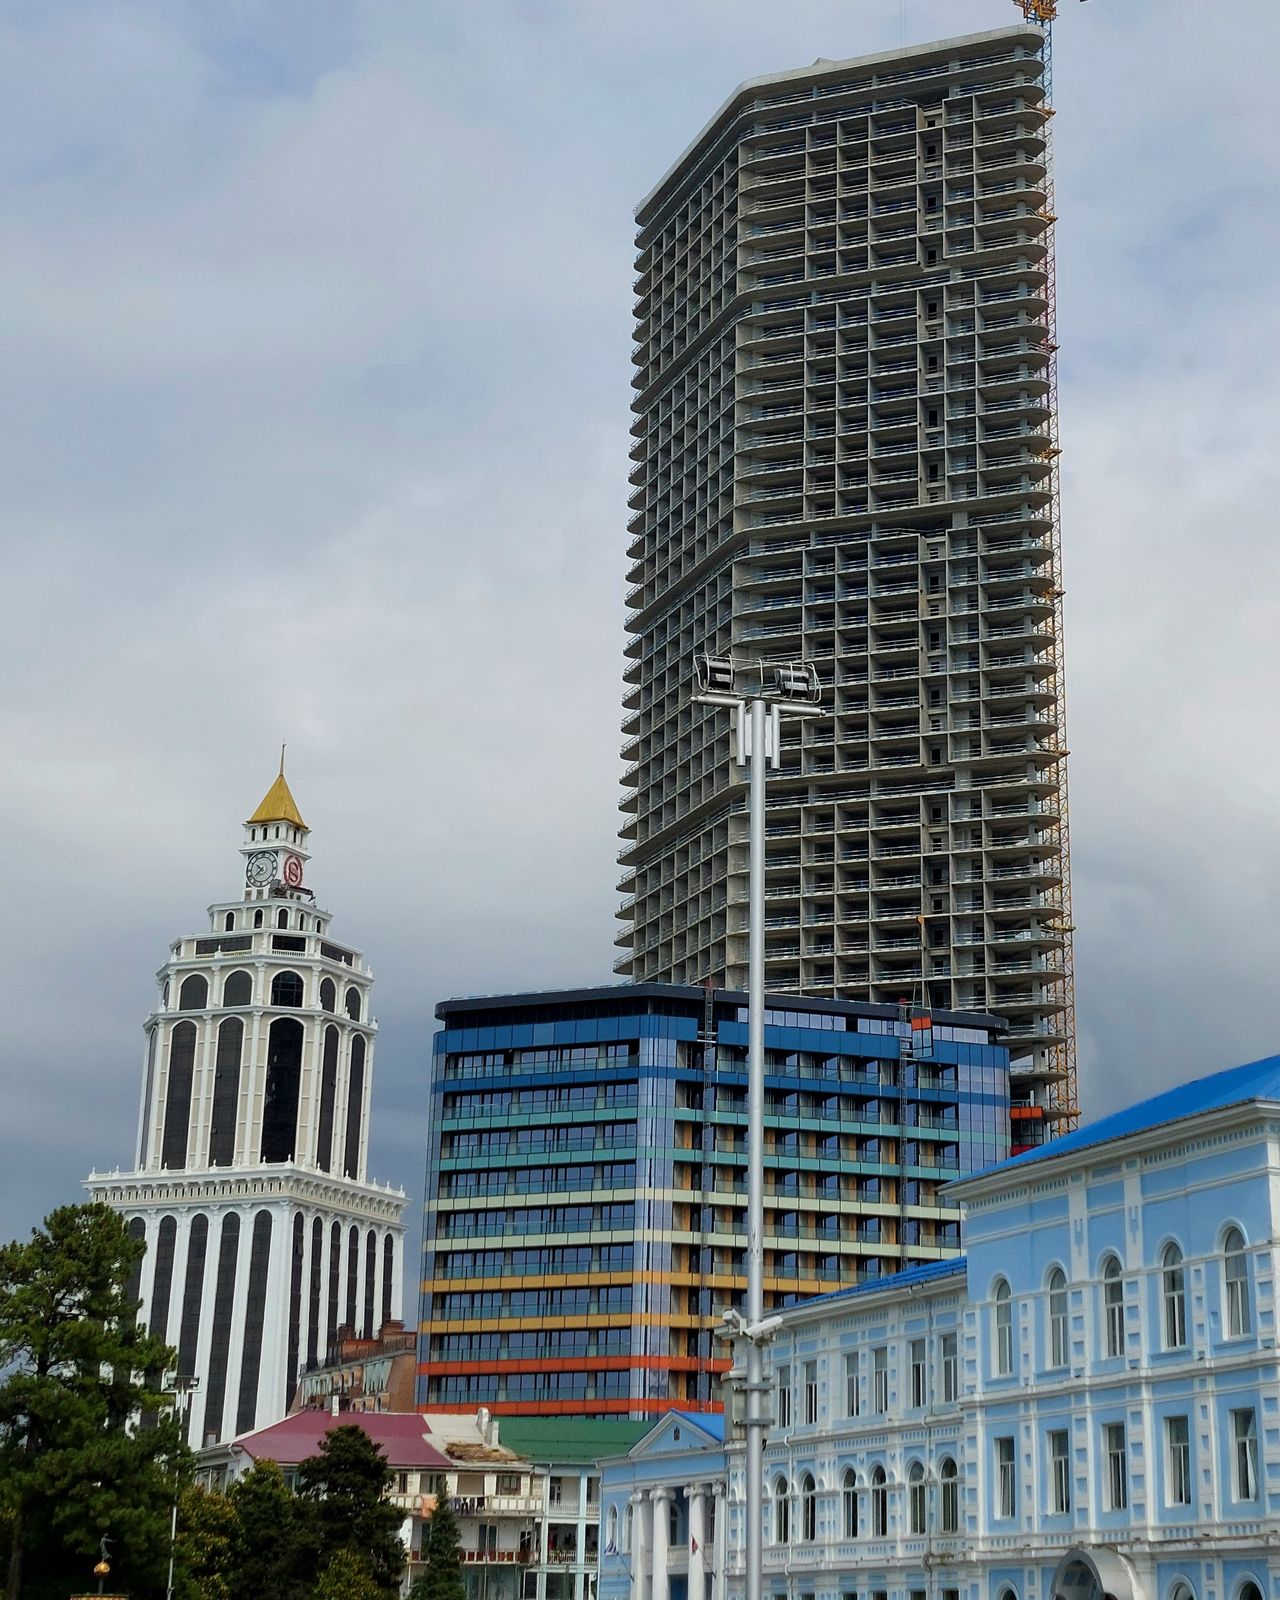 Many new skyscrapers are being built in the city.